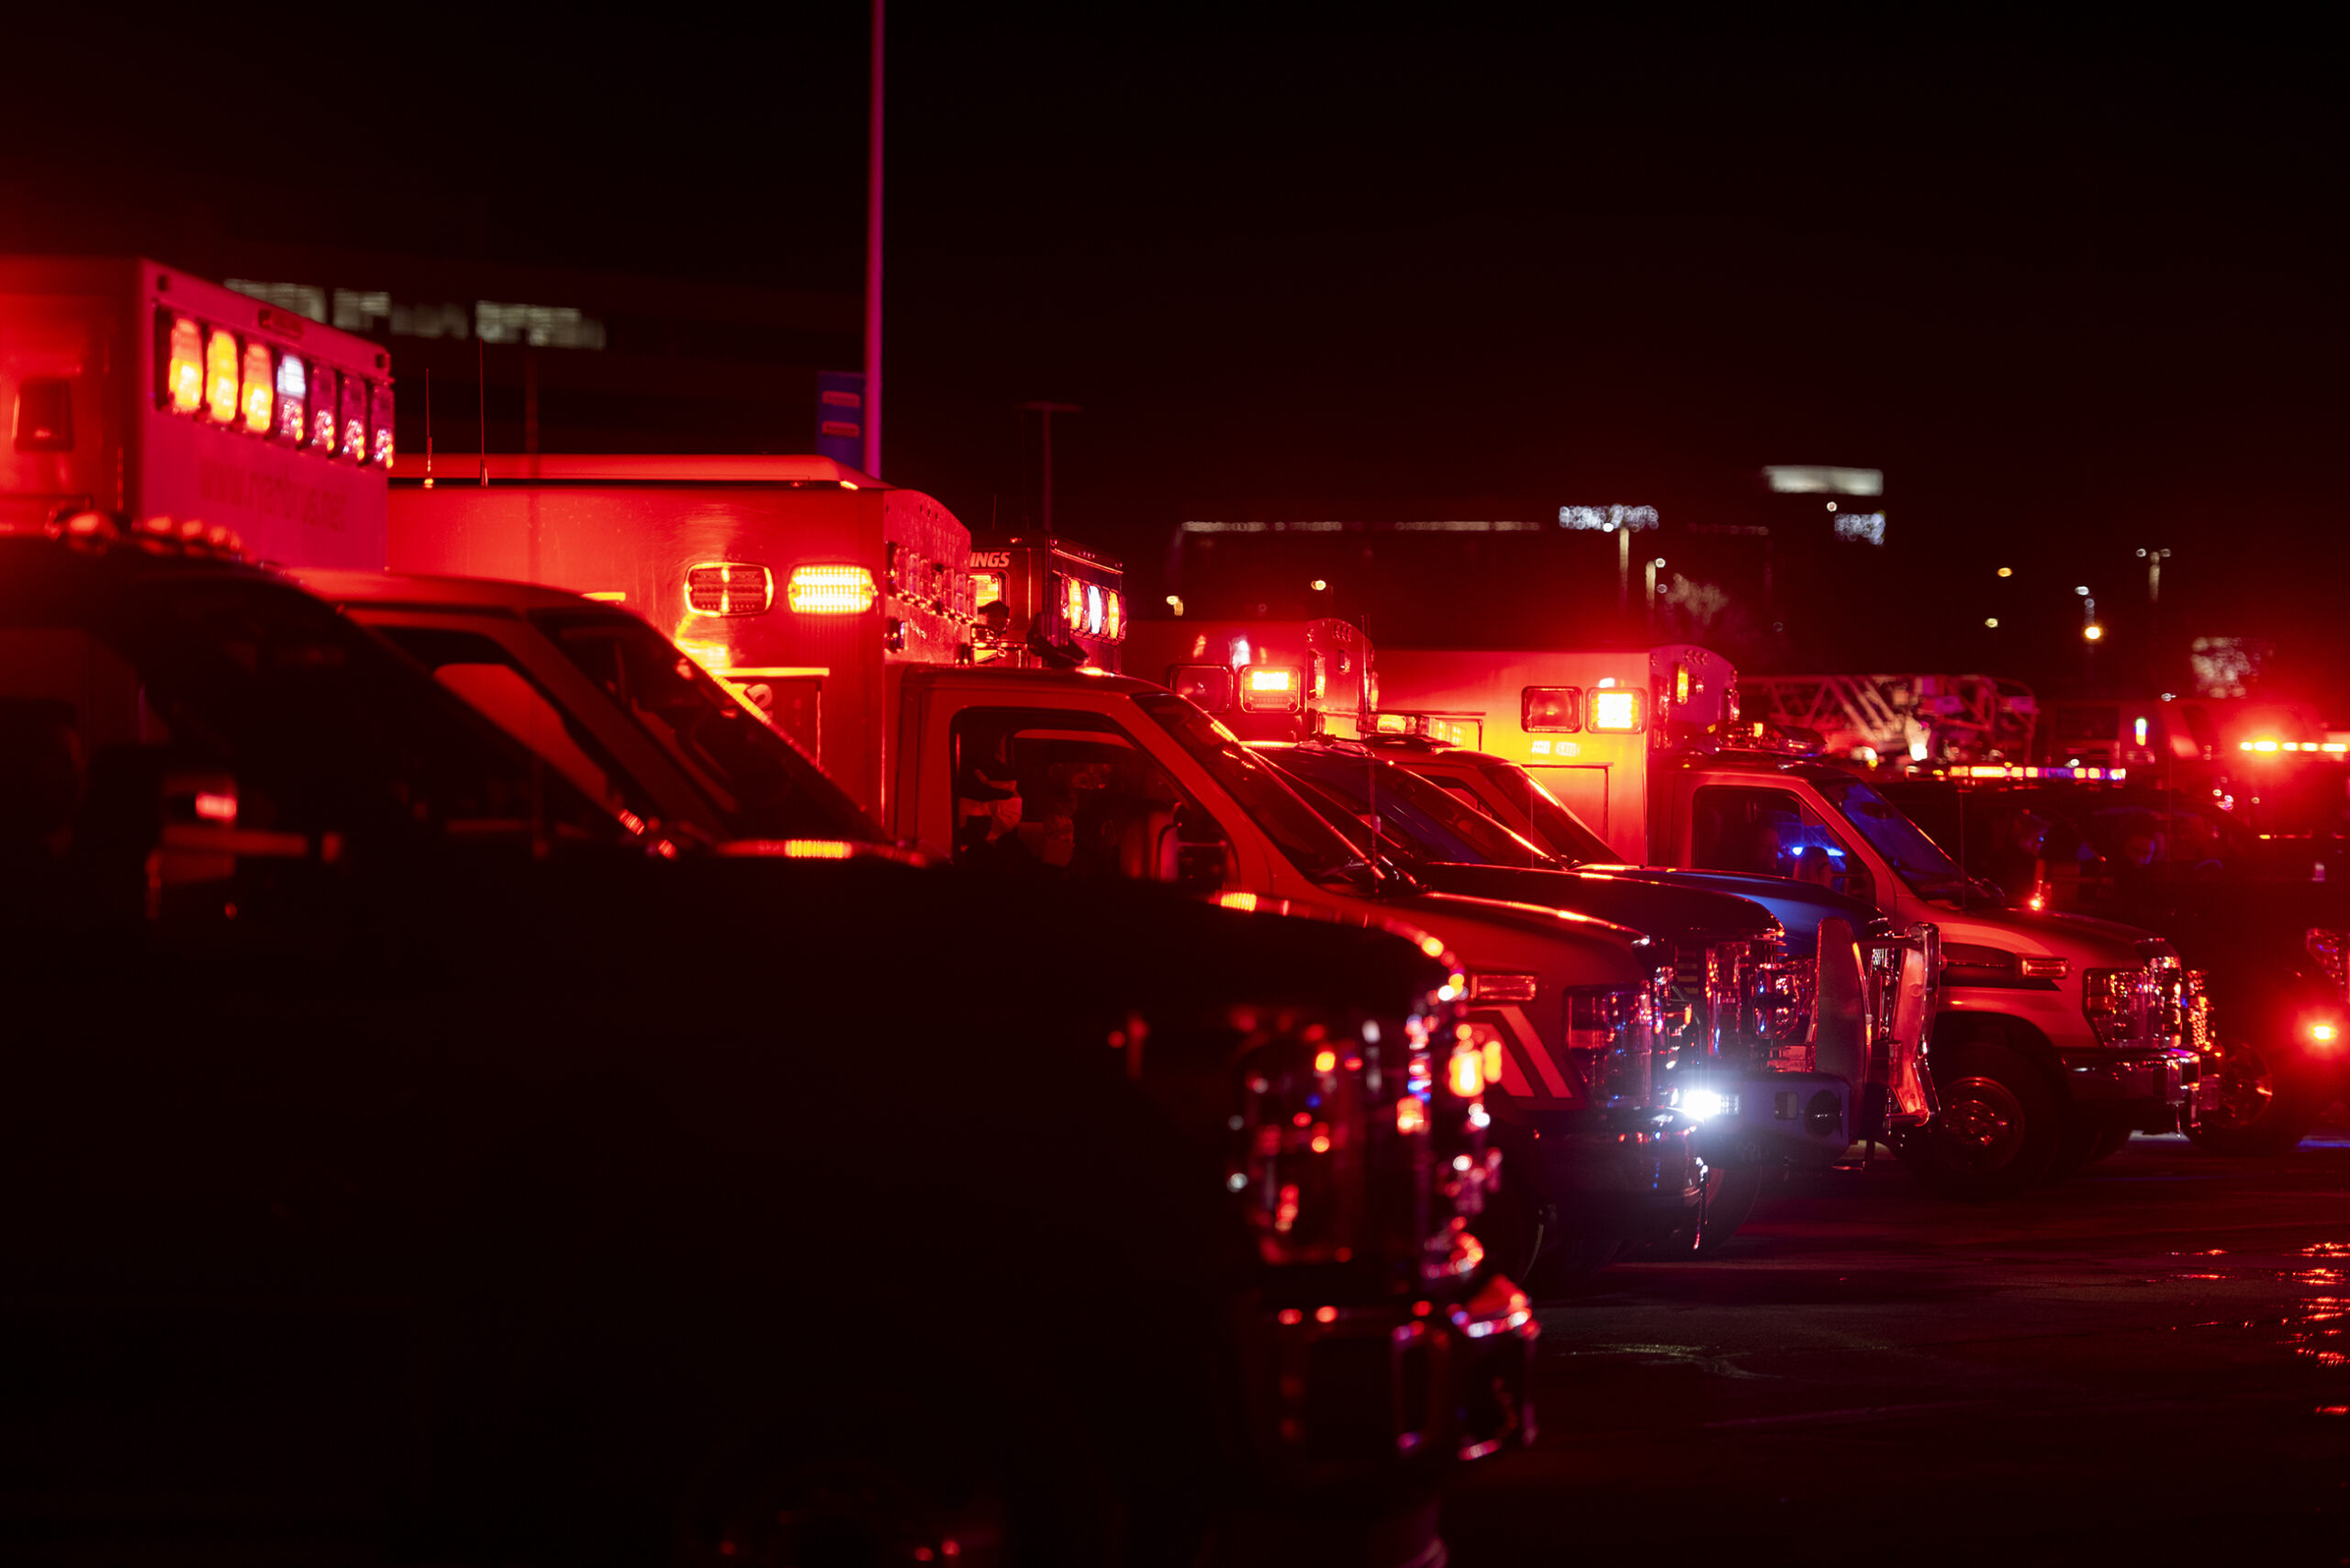 Ambulances glow with red light.